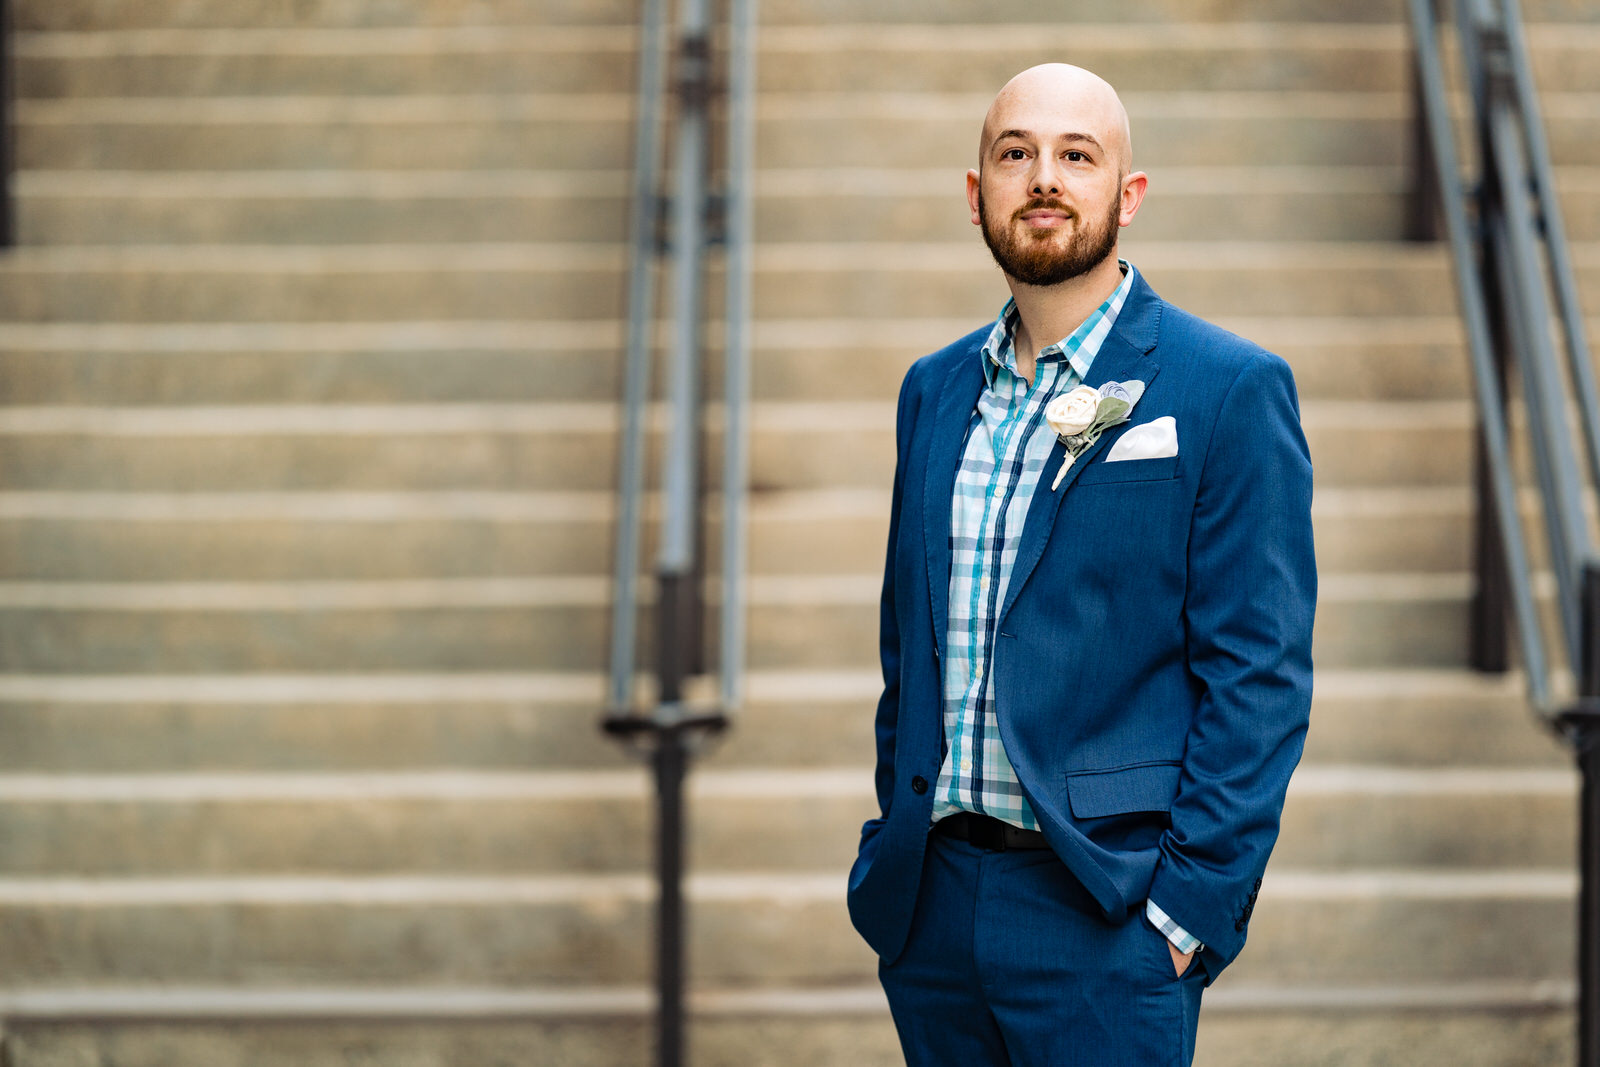 Man in a blue suit poses in front of a staircase for Durham Anniversary portraits